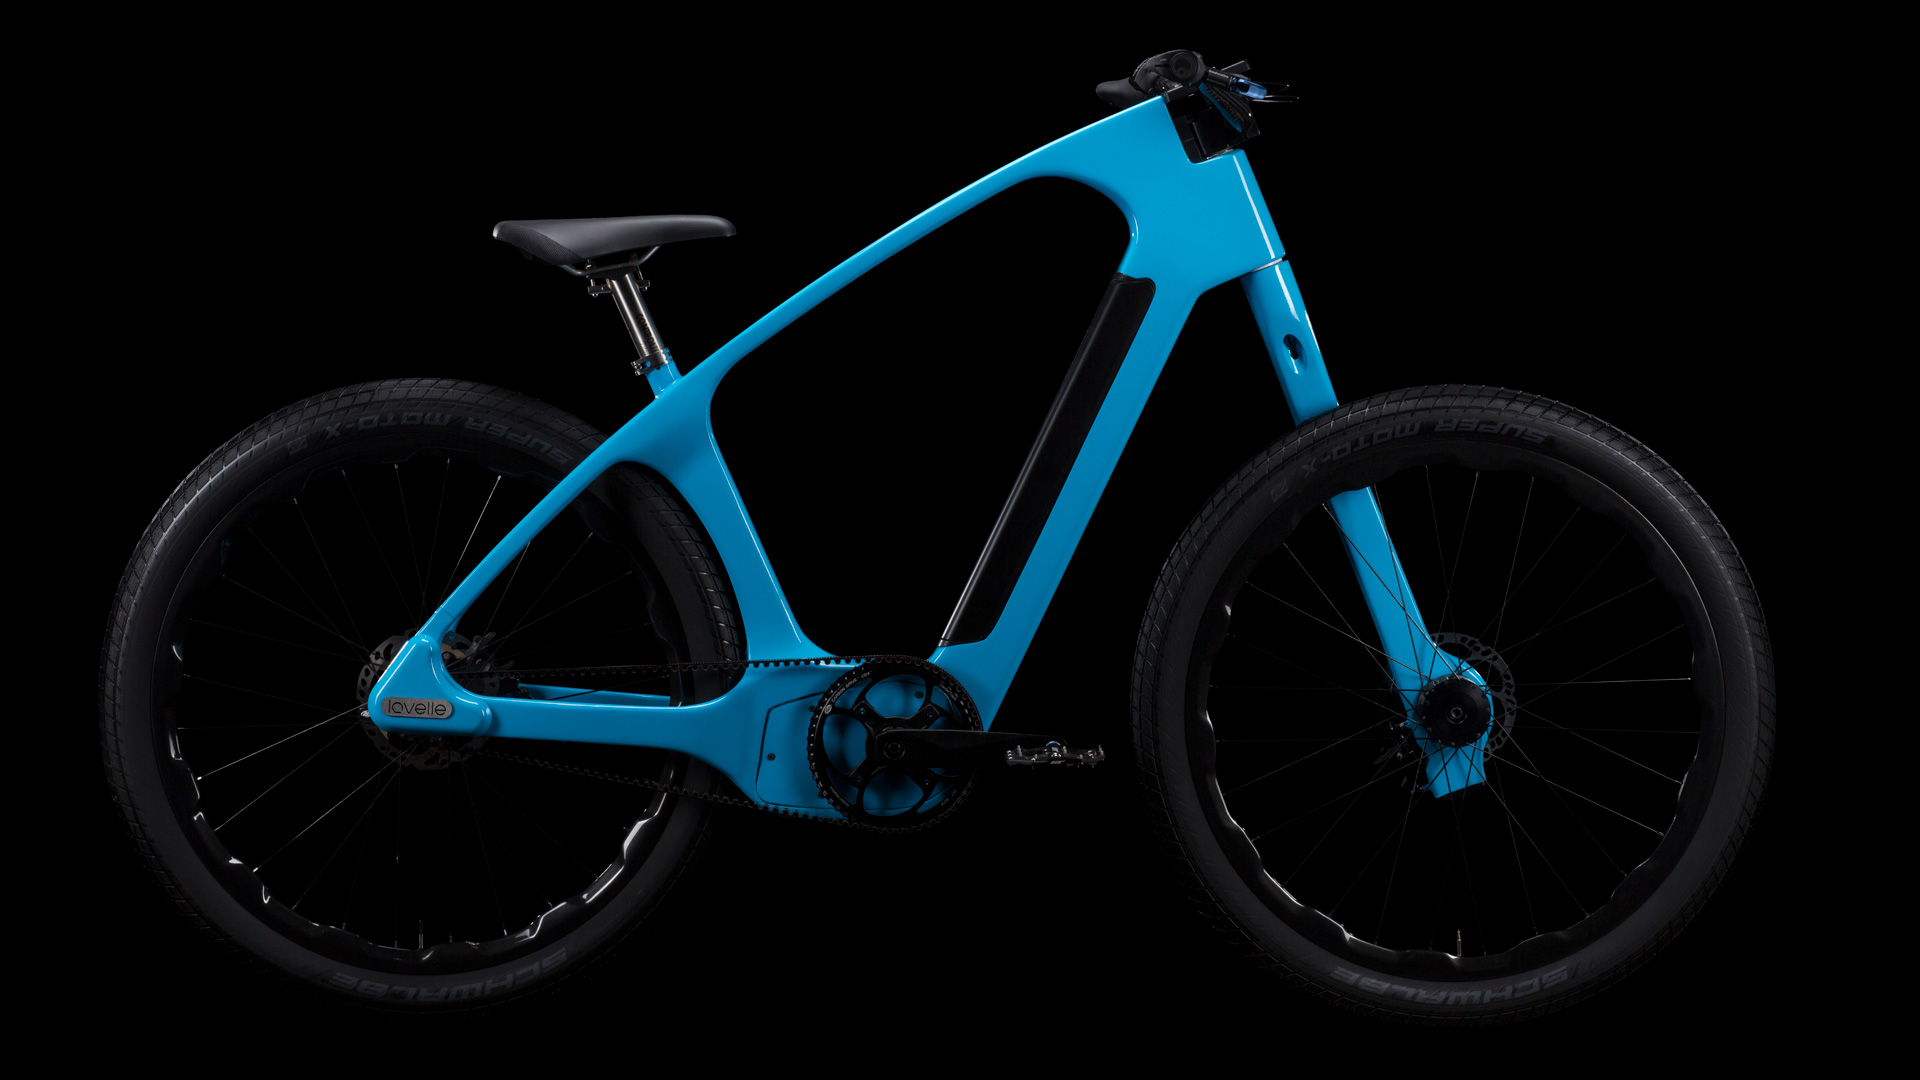 New stylish e-bike from Lavelle Bikes | thepack.news | THE PACK ...